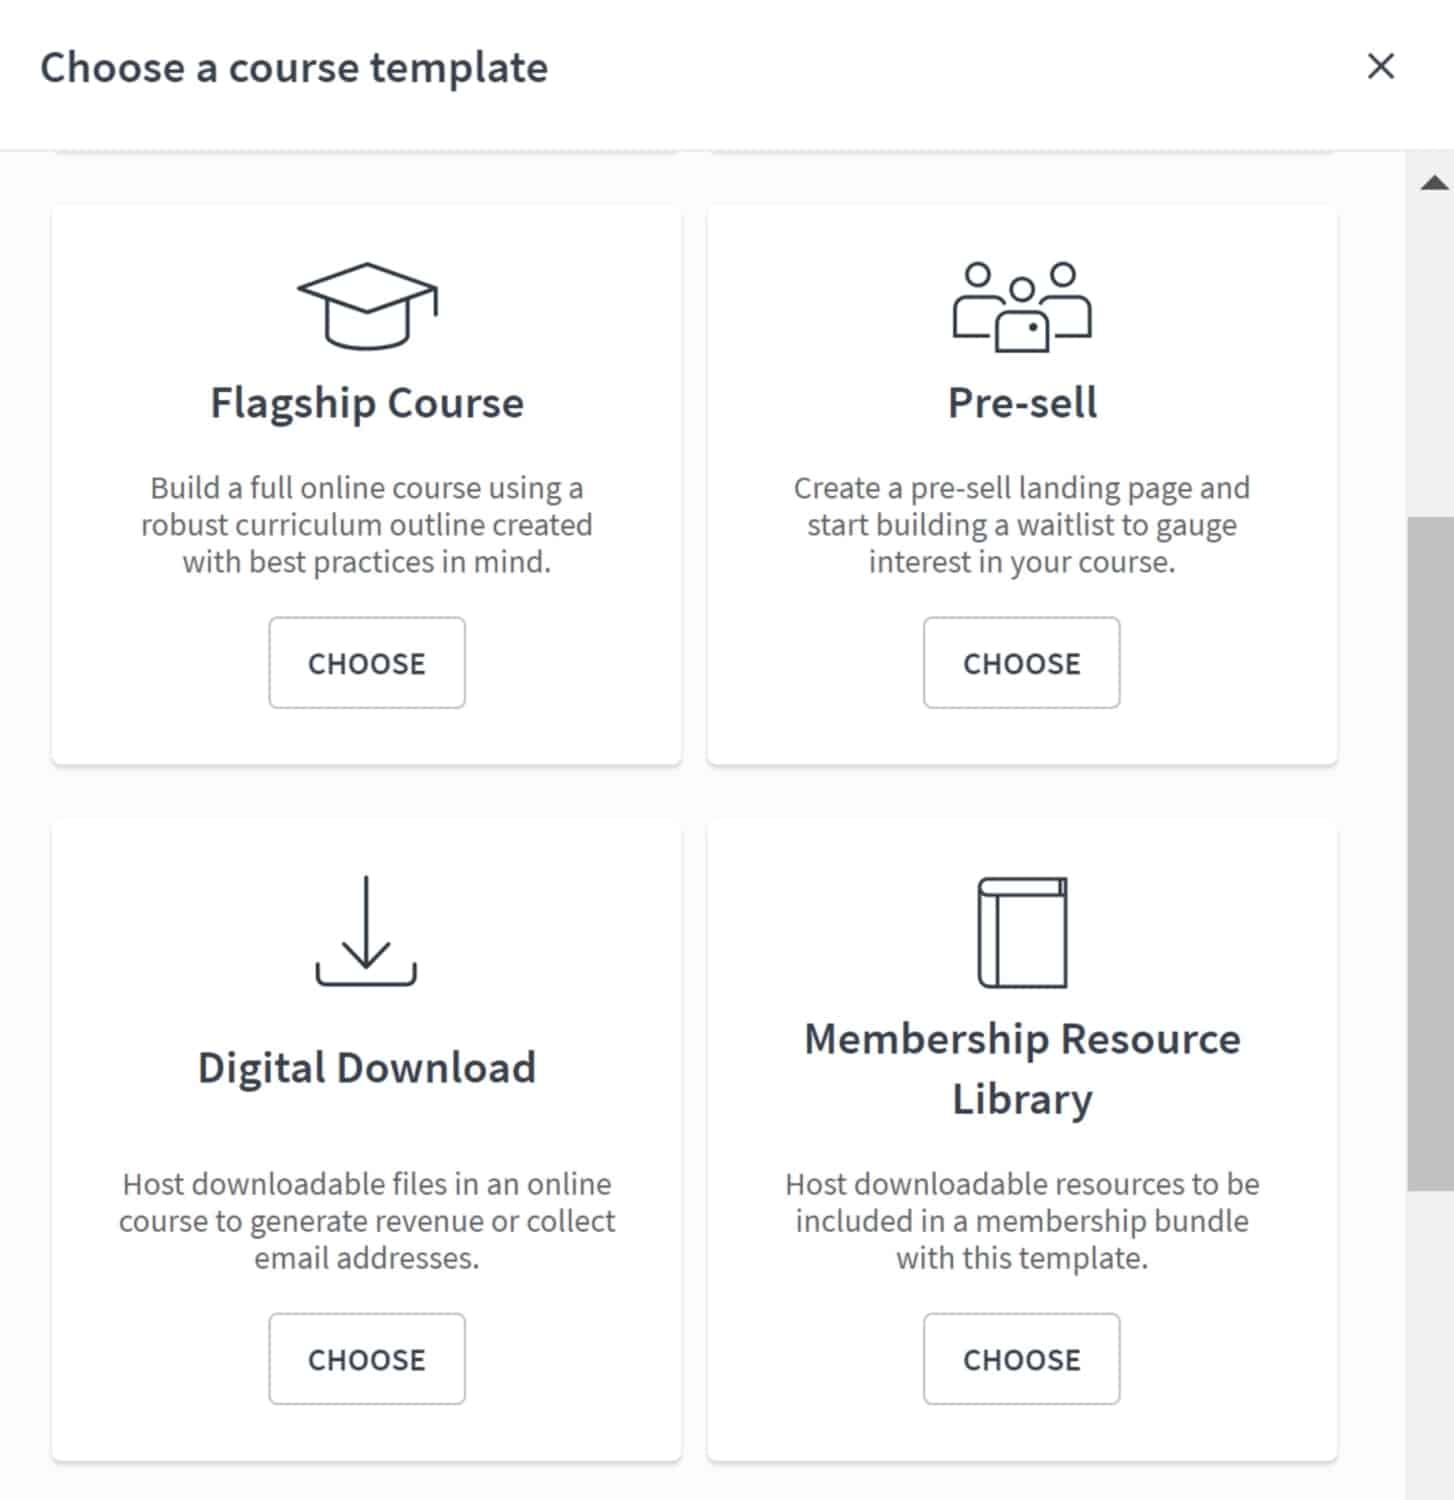 thinkific-course-template